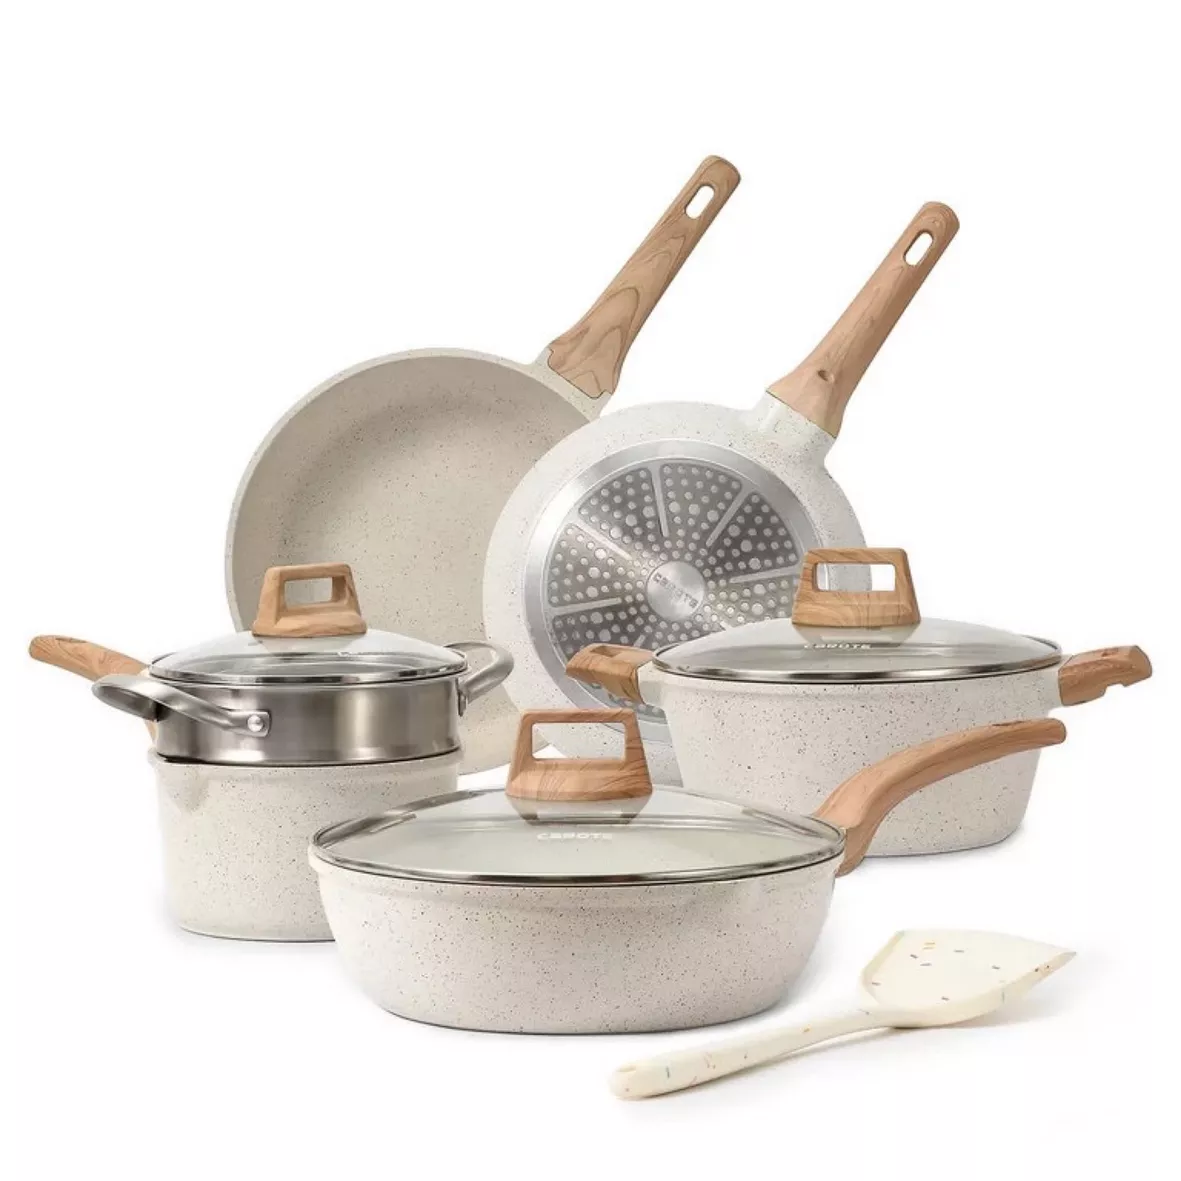 Carote Pots and Pans Set Nonstick, … curated on LTK